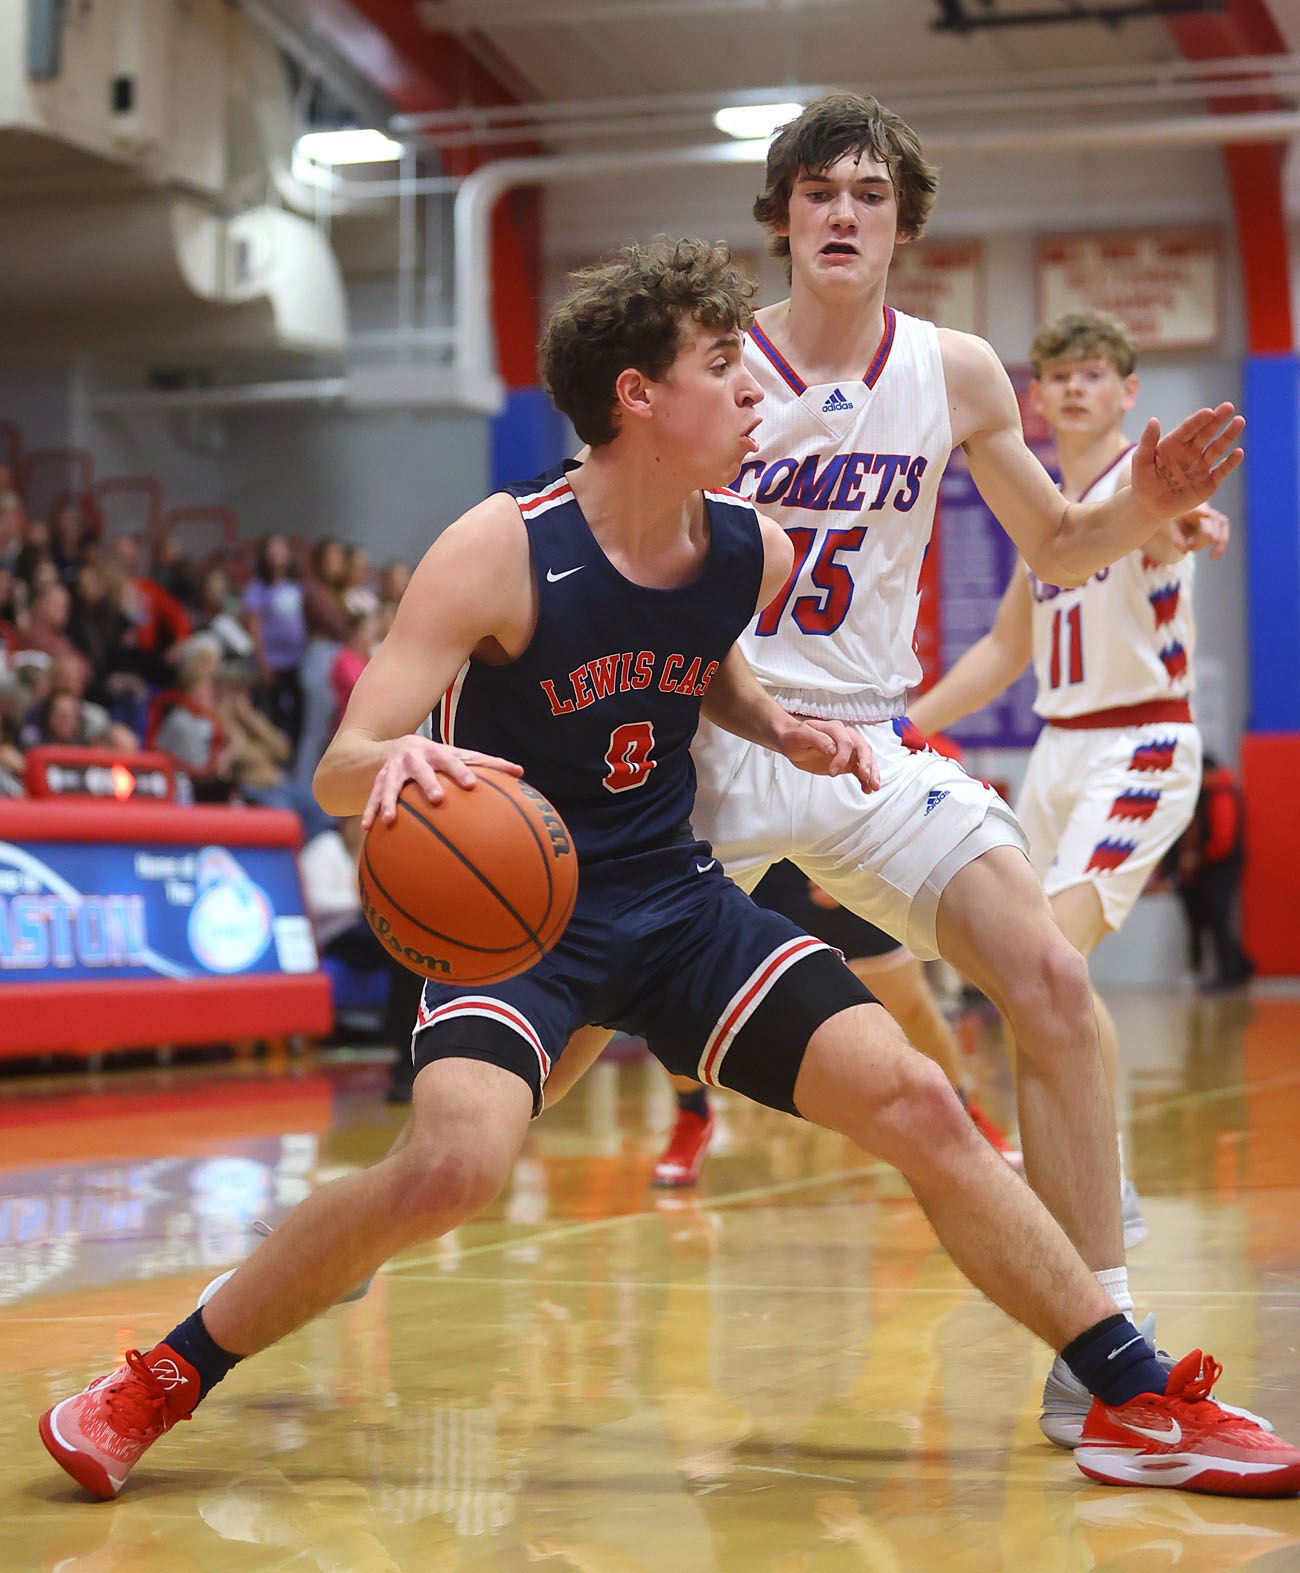 Lewis Cass vs. Winamac: BB Sectional Semifinal Preview and Johnson’s Impact